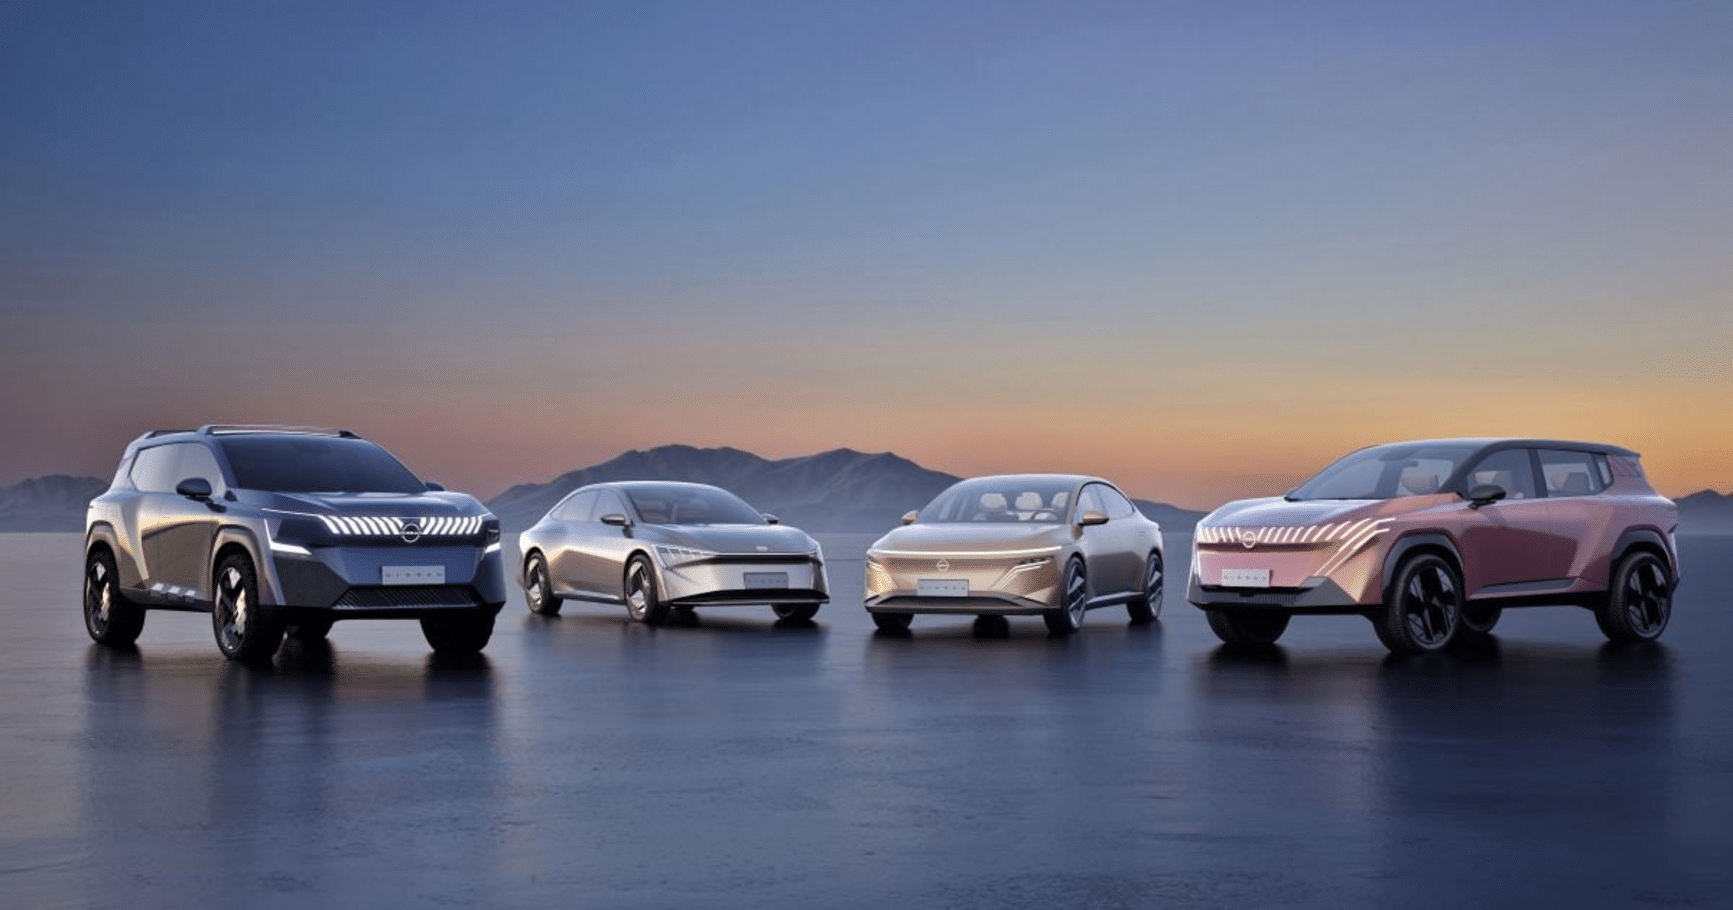 Nissan Unveils Exciting Range of Electric and Hybrid Concept Vehicles at Beijing Motor Show